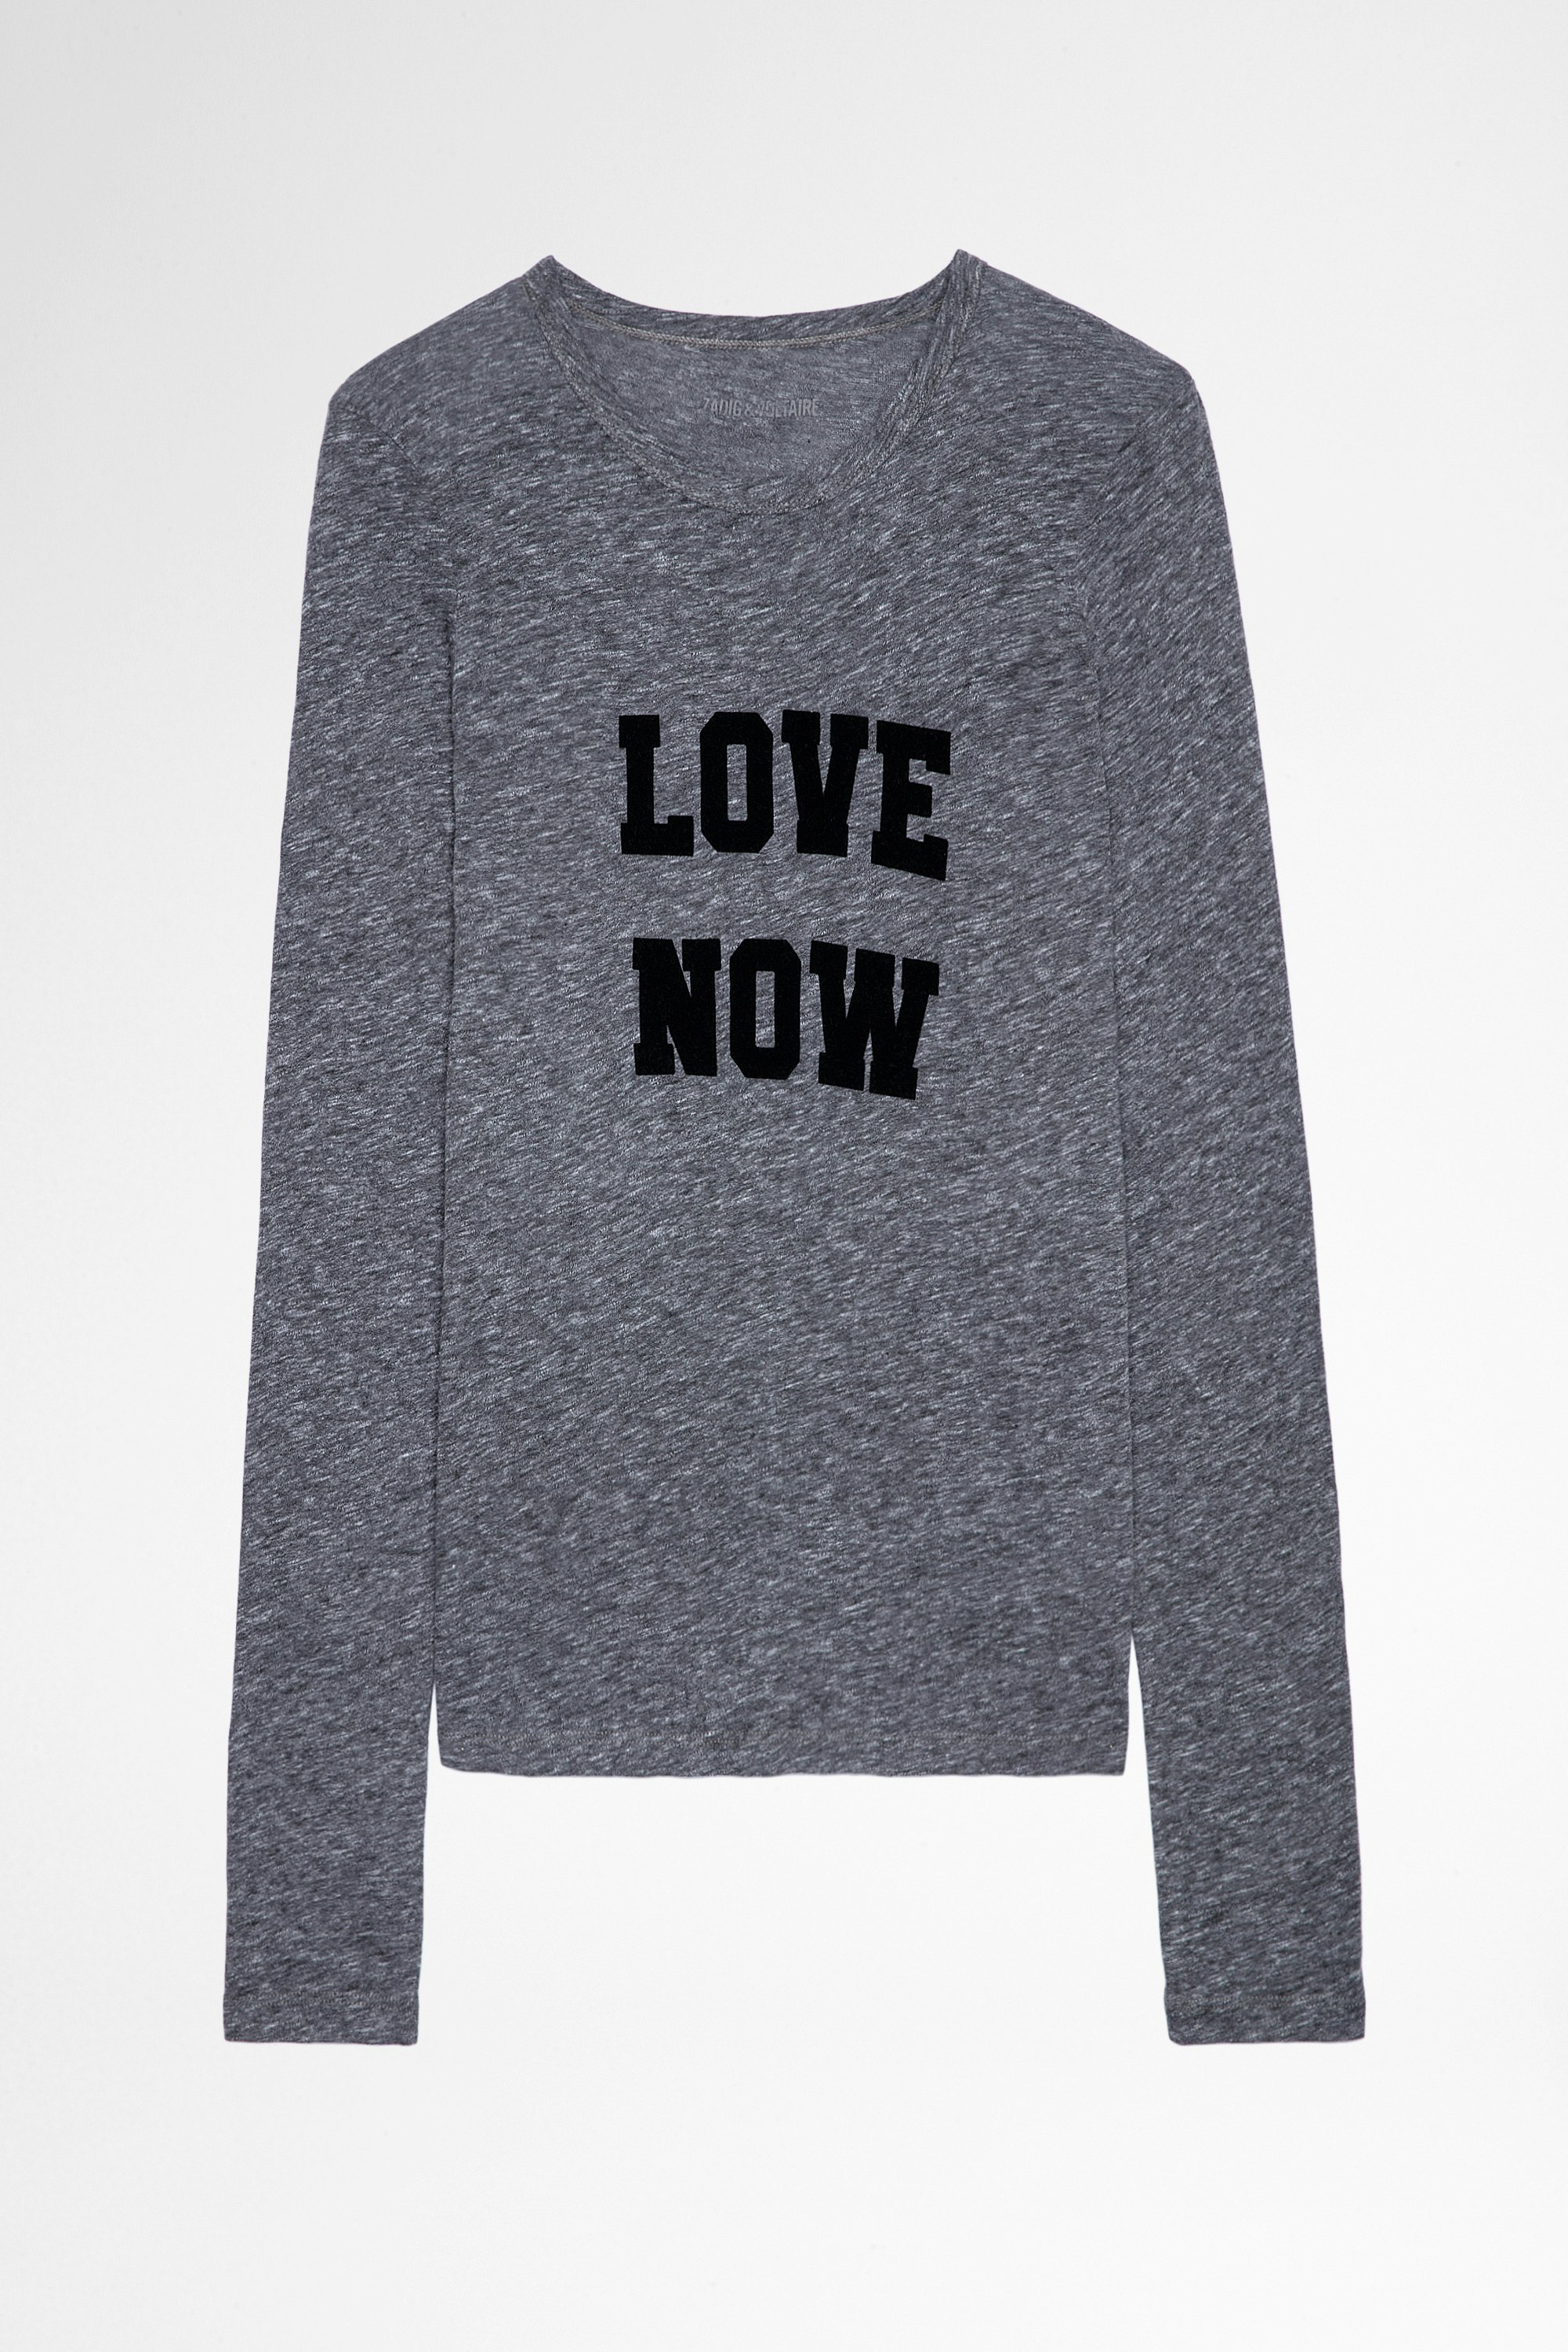 Willy T-Shirt Women's Love Now gray long-sleeved T-shirt